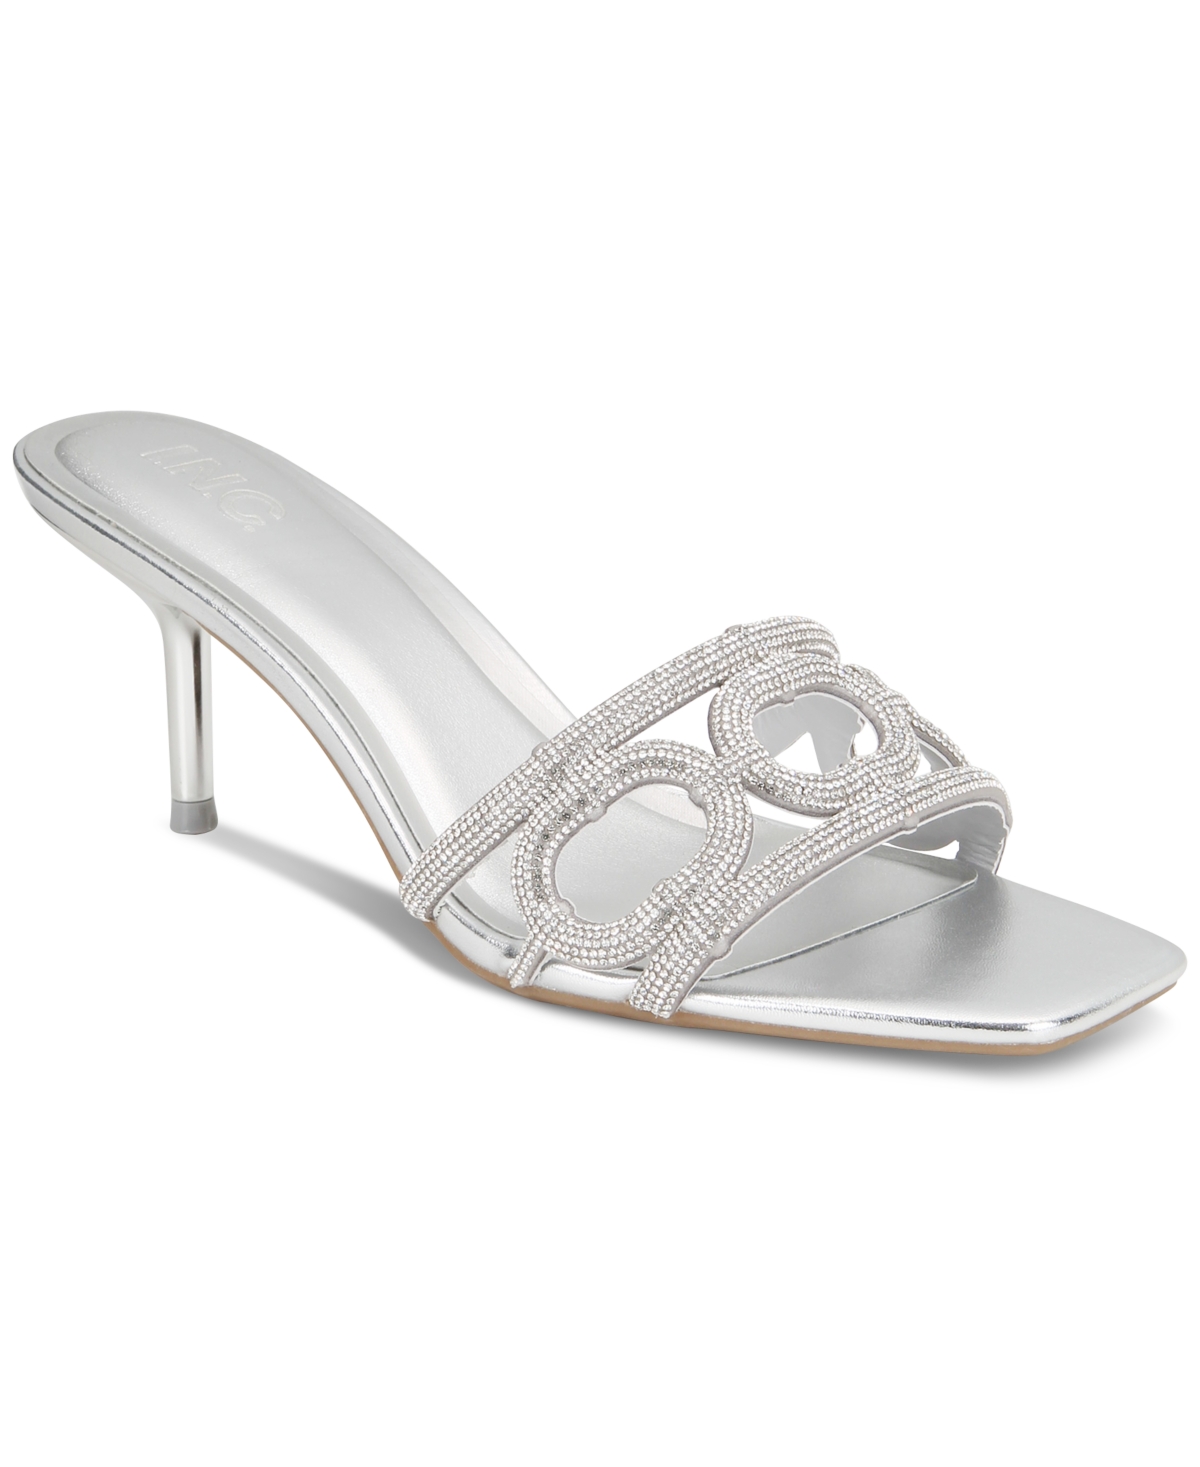 Women's Martinaa Slide Sandals, Created for Macy's - Silver Bling